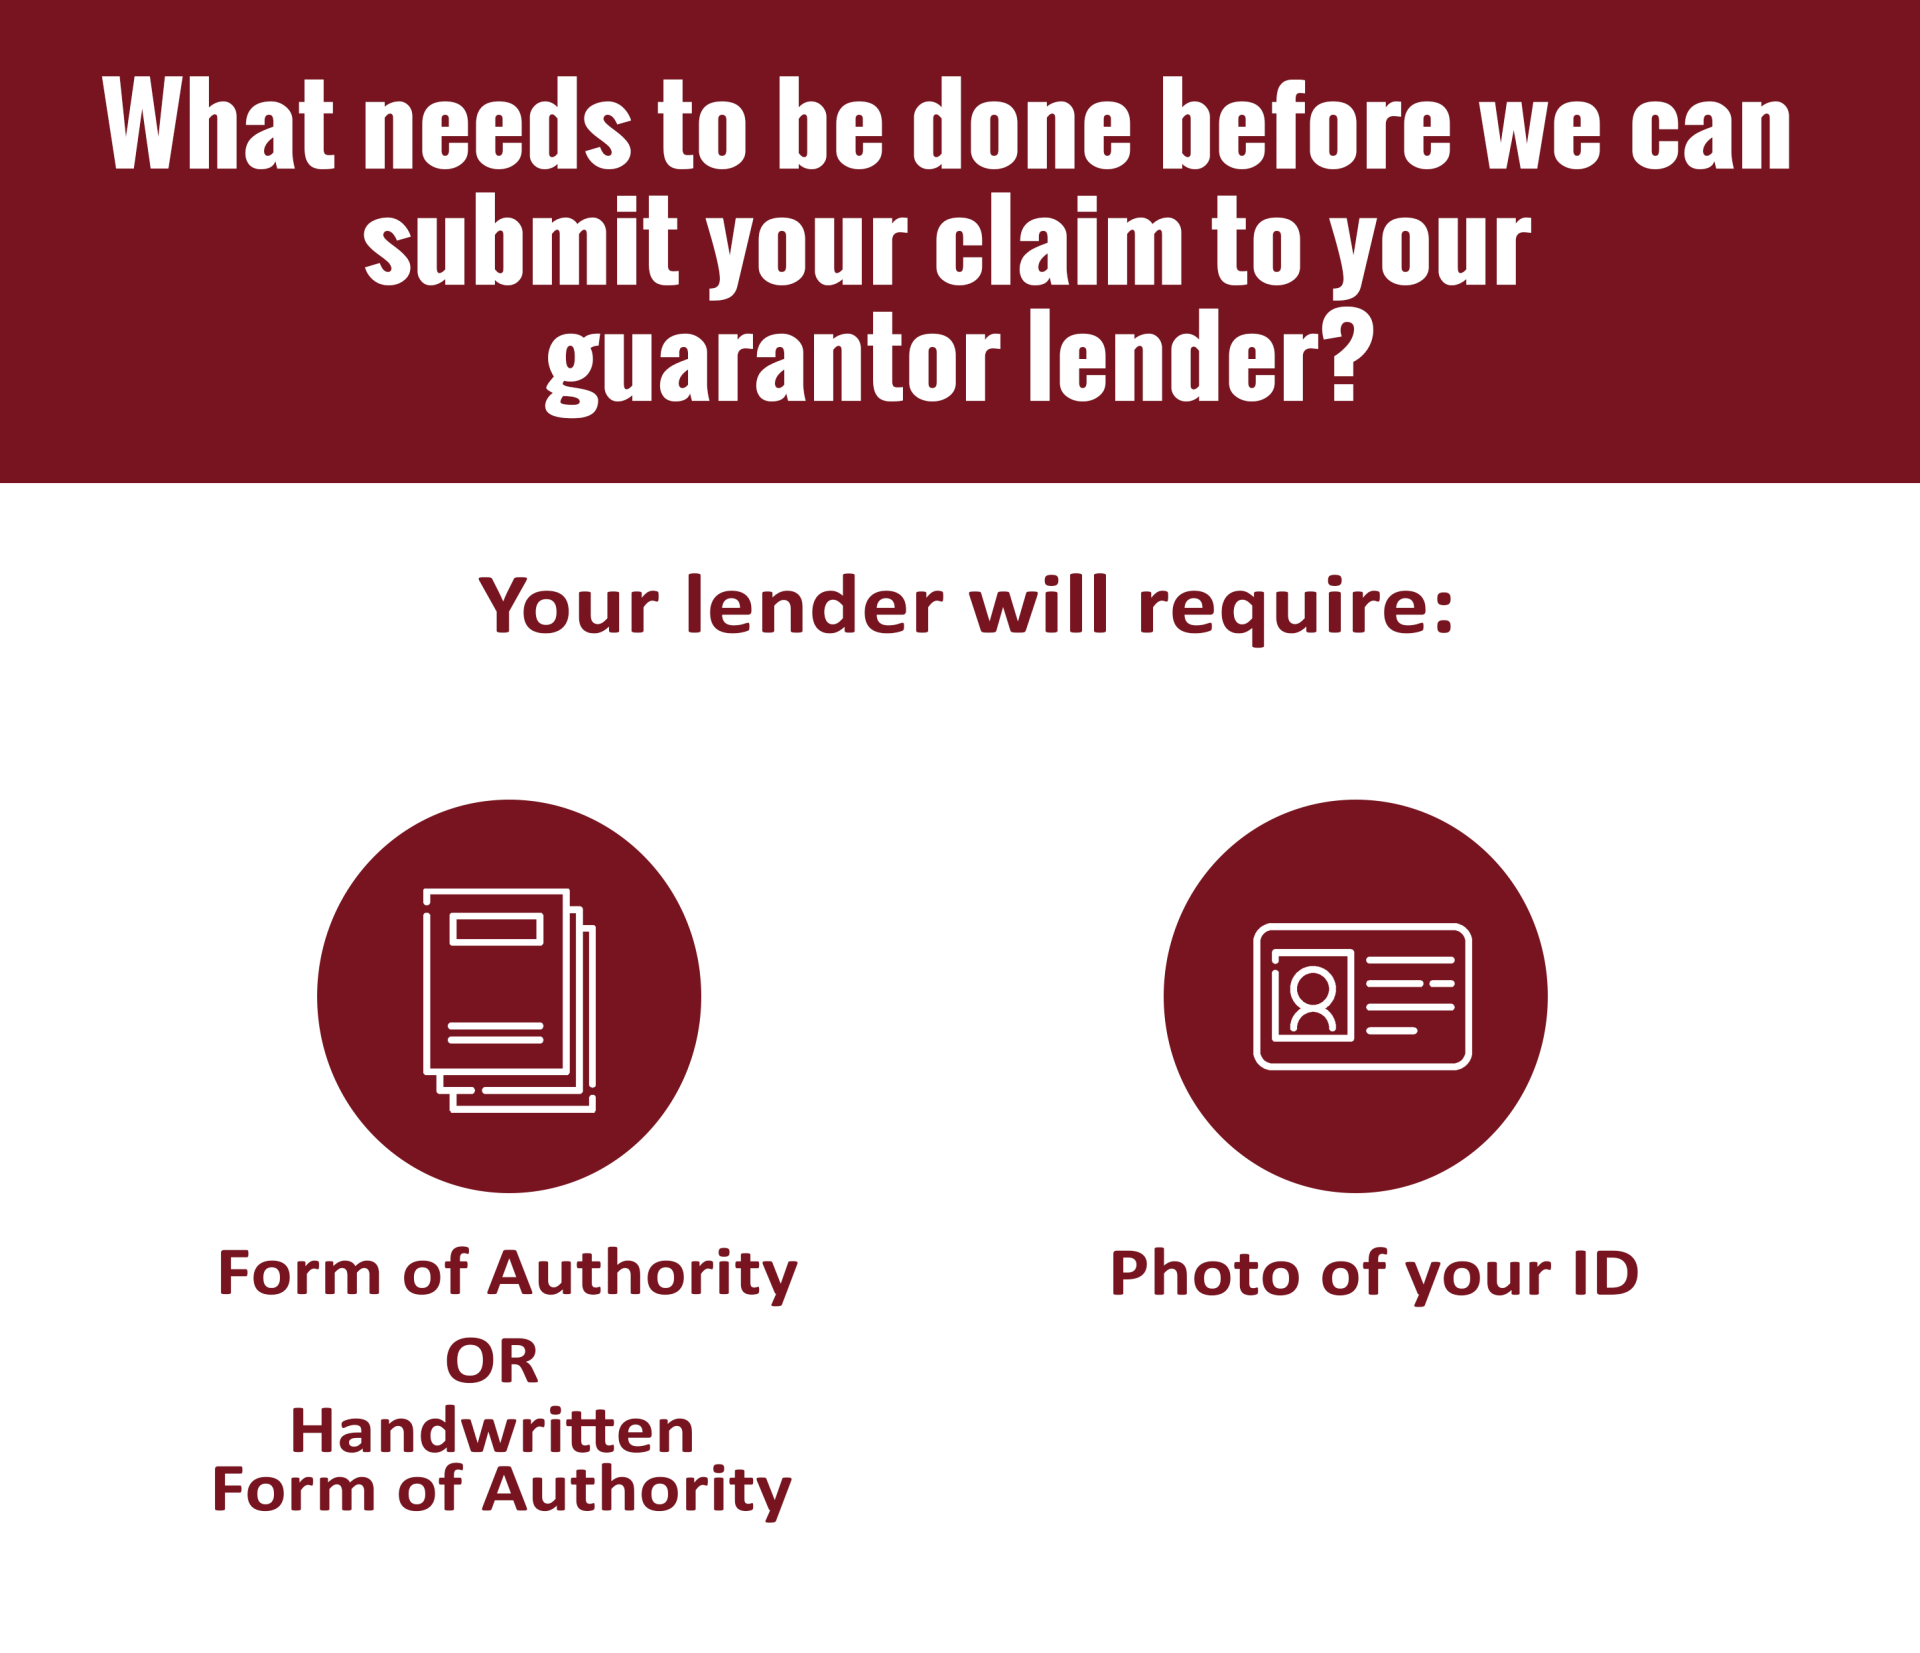 What needs to be done before we can submit your claim to your guarantor lender